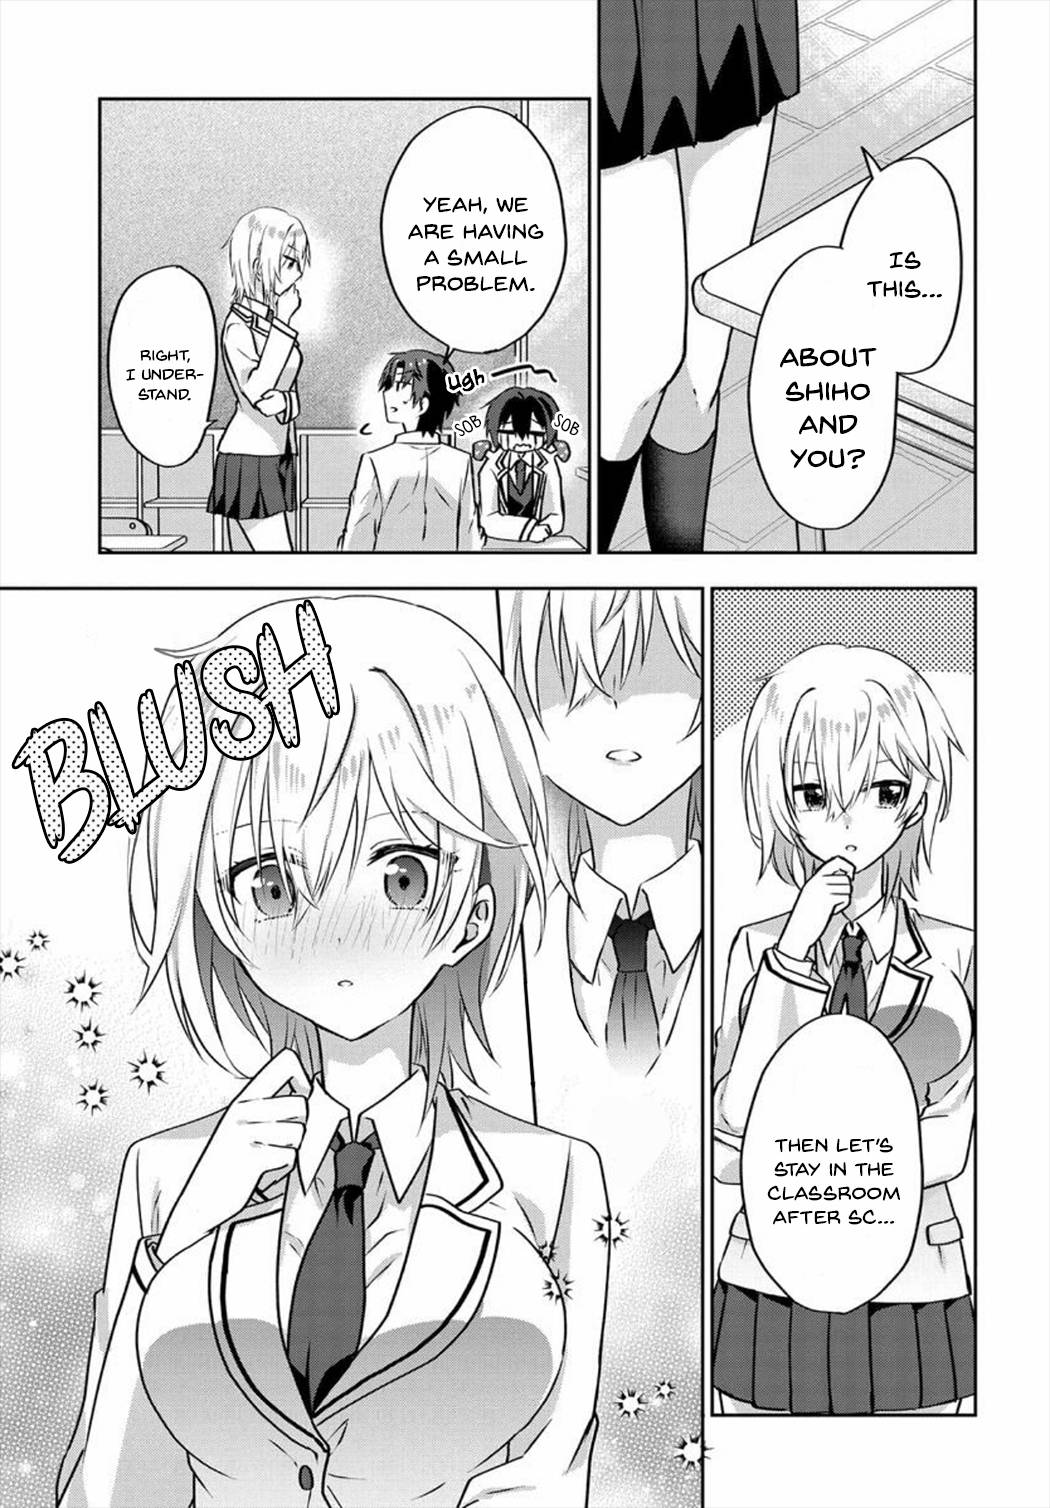 Since I’Ve Entered The World Of Romantic Comedy Manga, I’Ll Do My Best To Make The Losing Heroine Happy - chapter 3.2 - #6